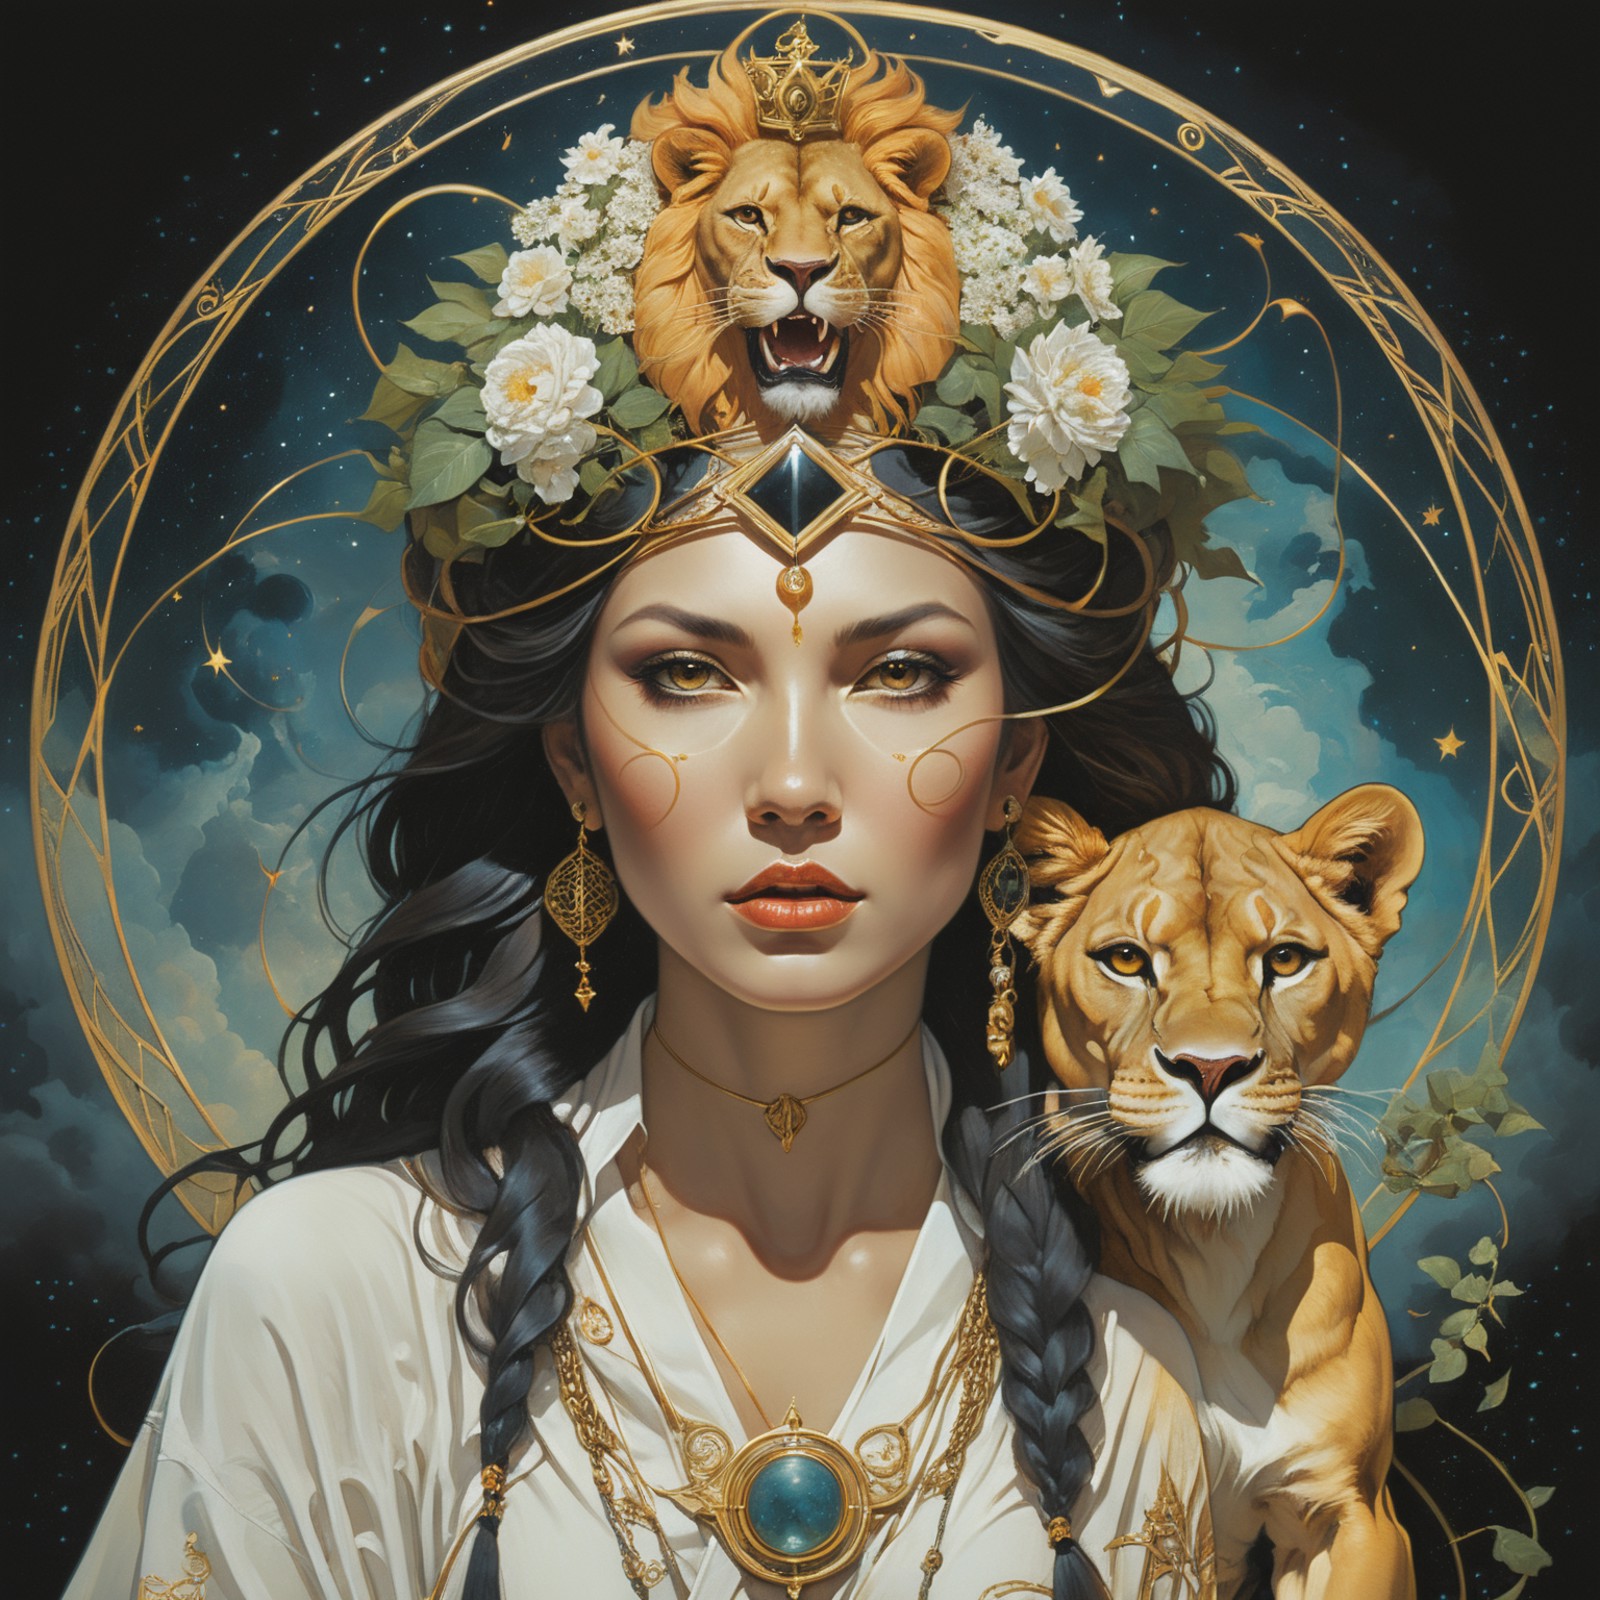 The Strenght tarot card, (Strength Tarot card, a woman gently strokes a lion on its forehead and jaw. Even though it is kn...